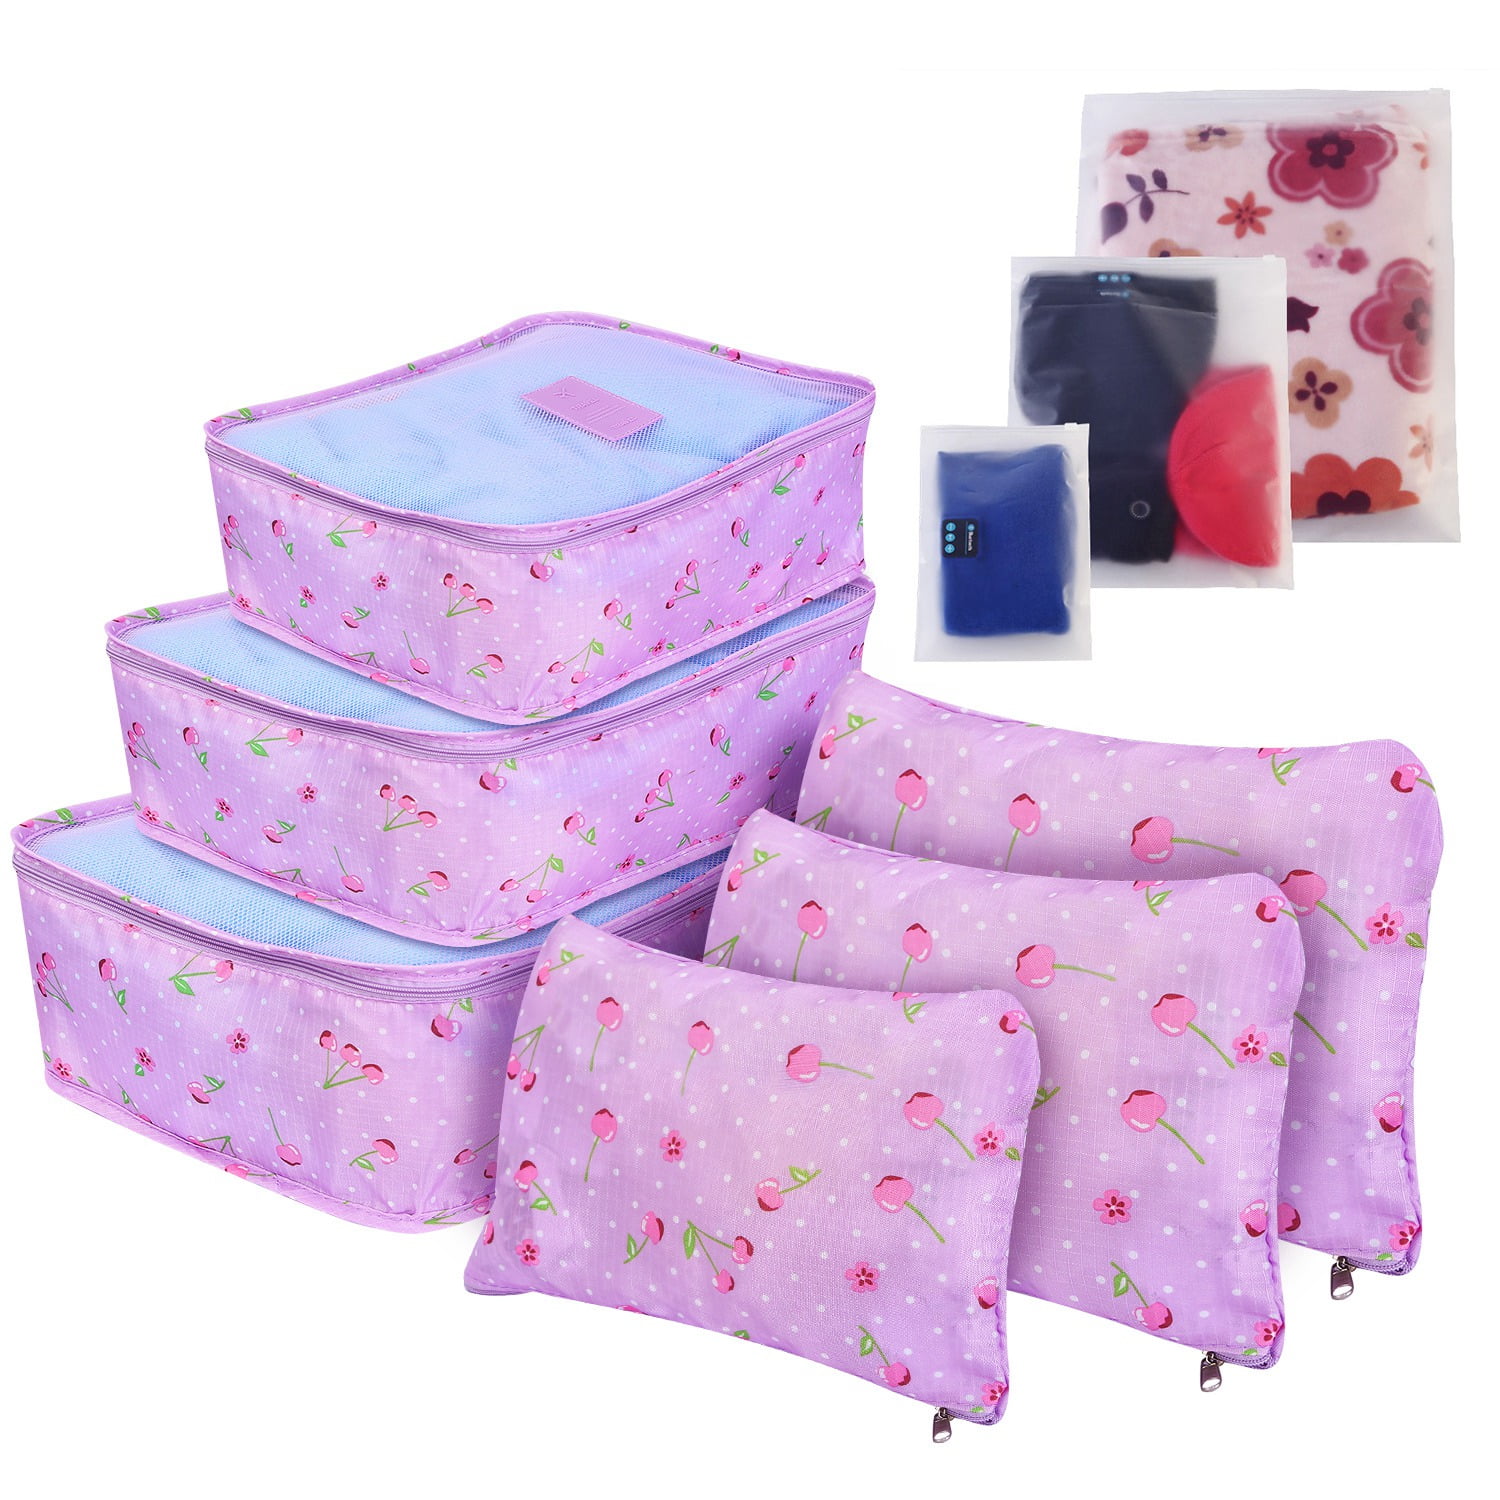 7 Set Packing Cubes Luggage Organizers Clothes Storage 3 Mesh Bags 3 Pouches 1 Toiletry Bag Blue Cherry 